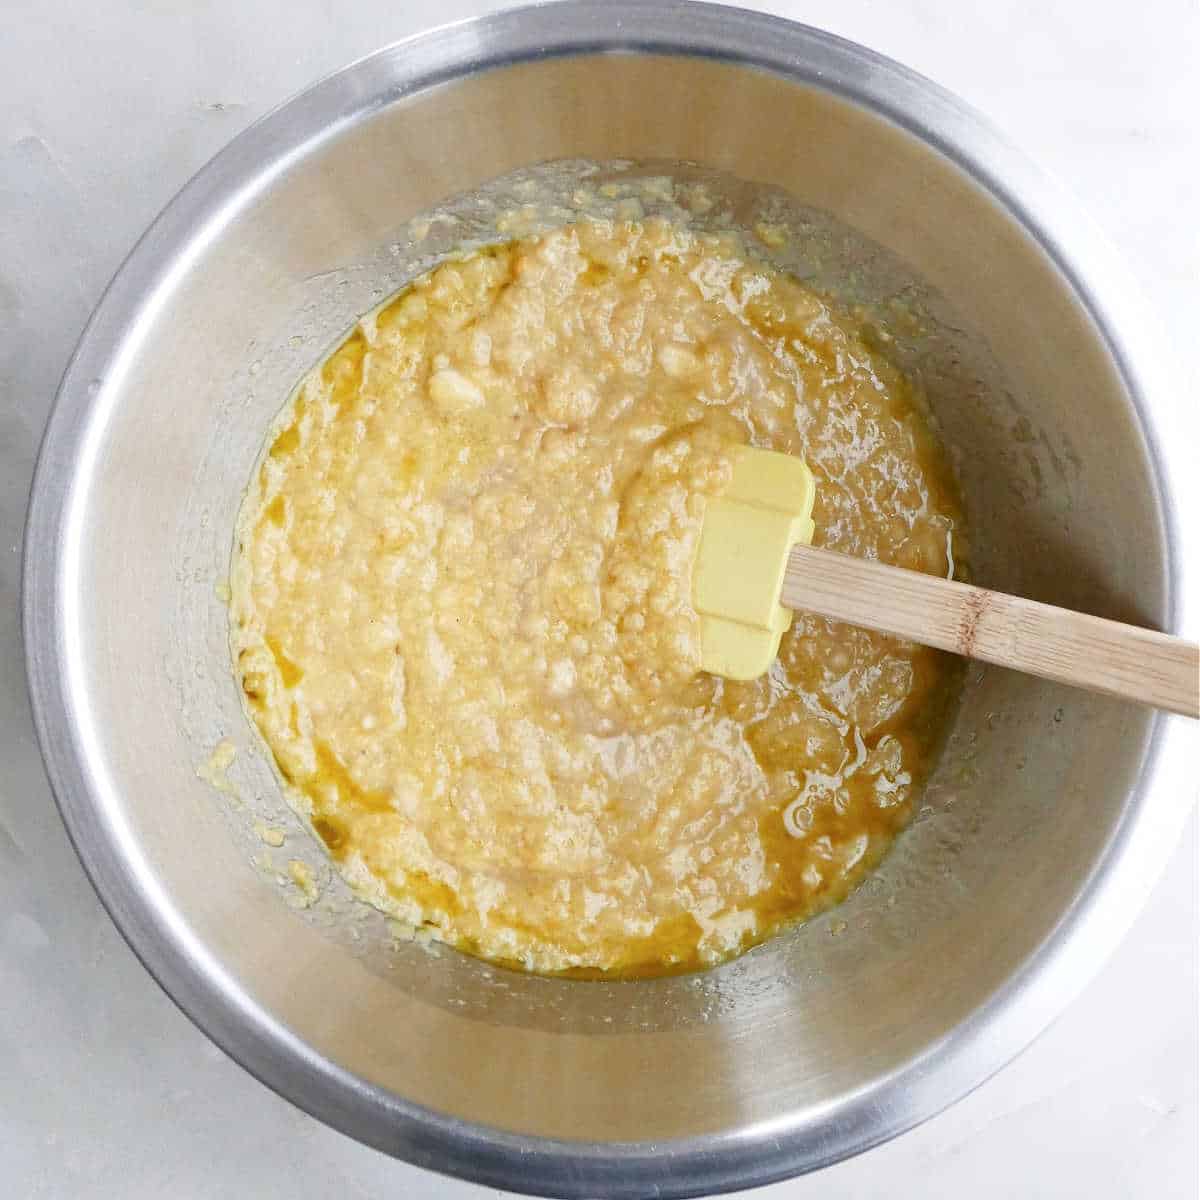 wet ingredients for banana lentil muffins mixed together with a rubber spatula in a bowl